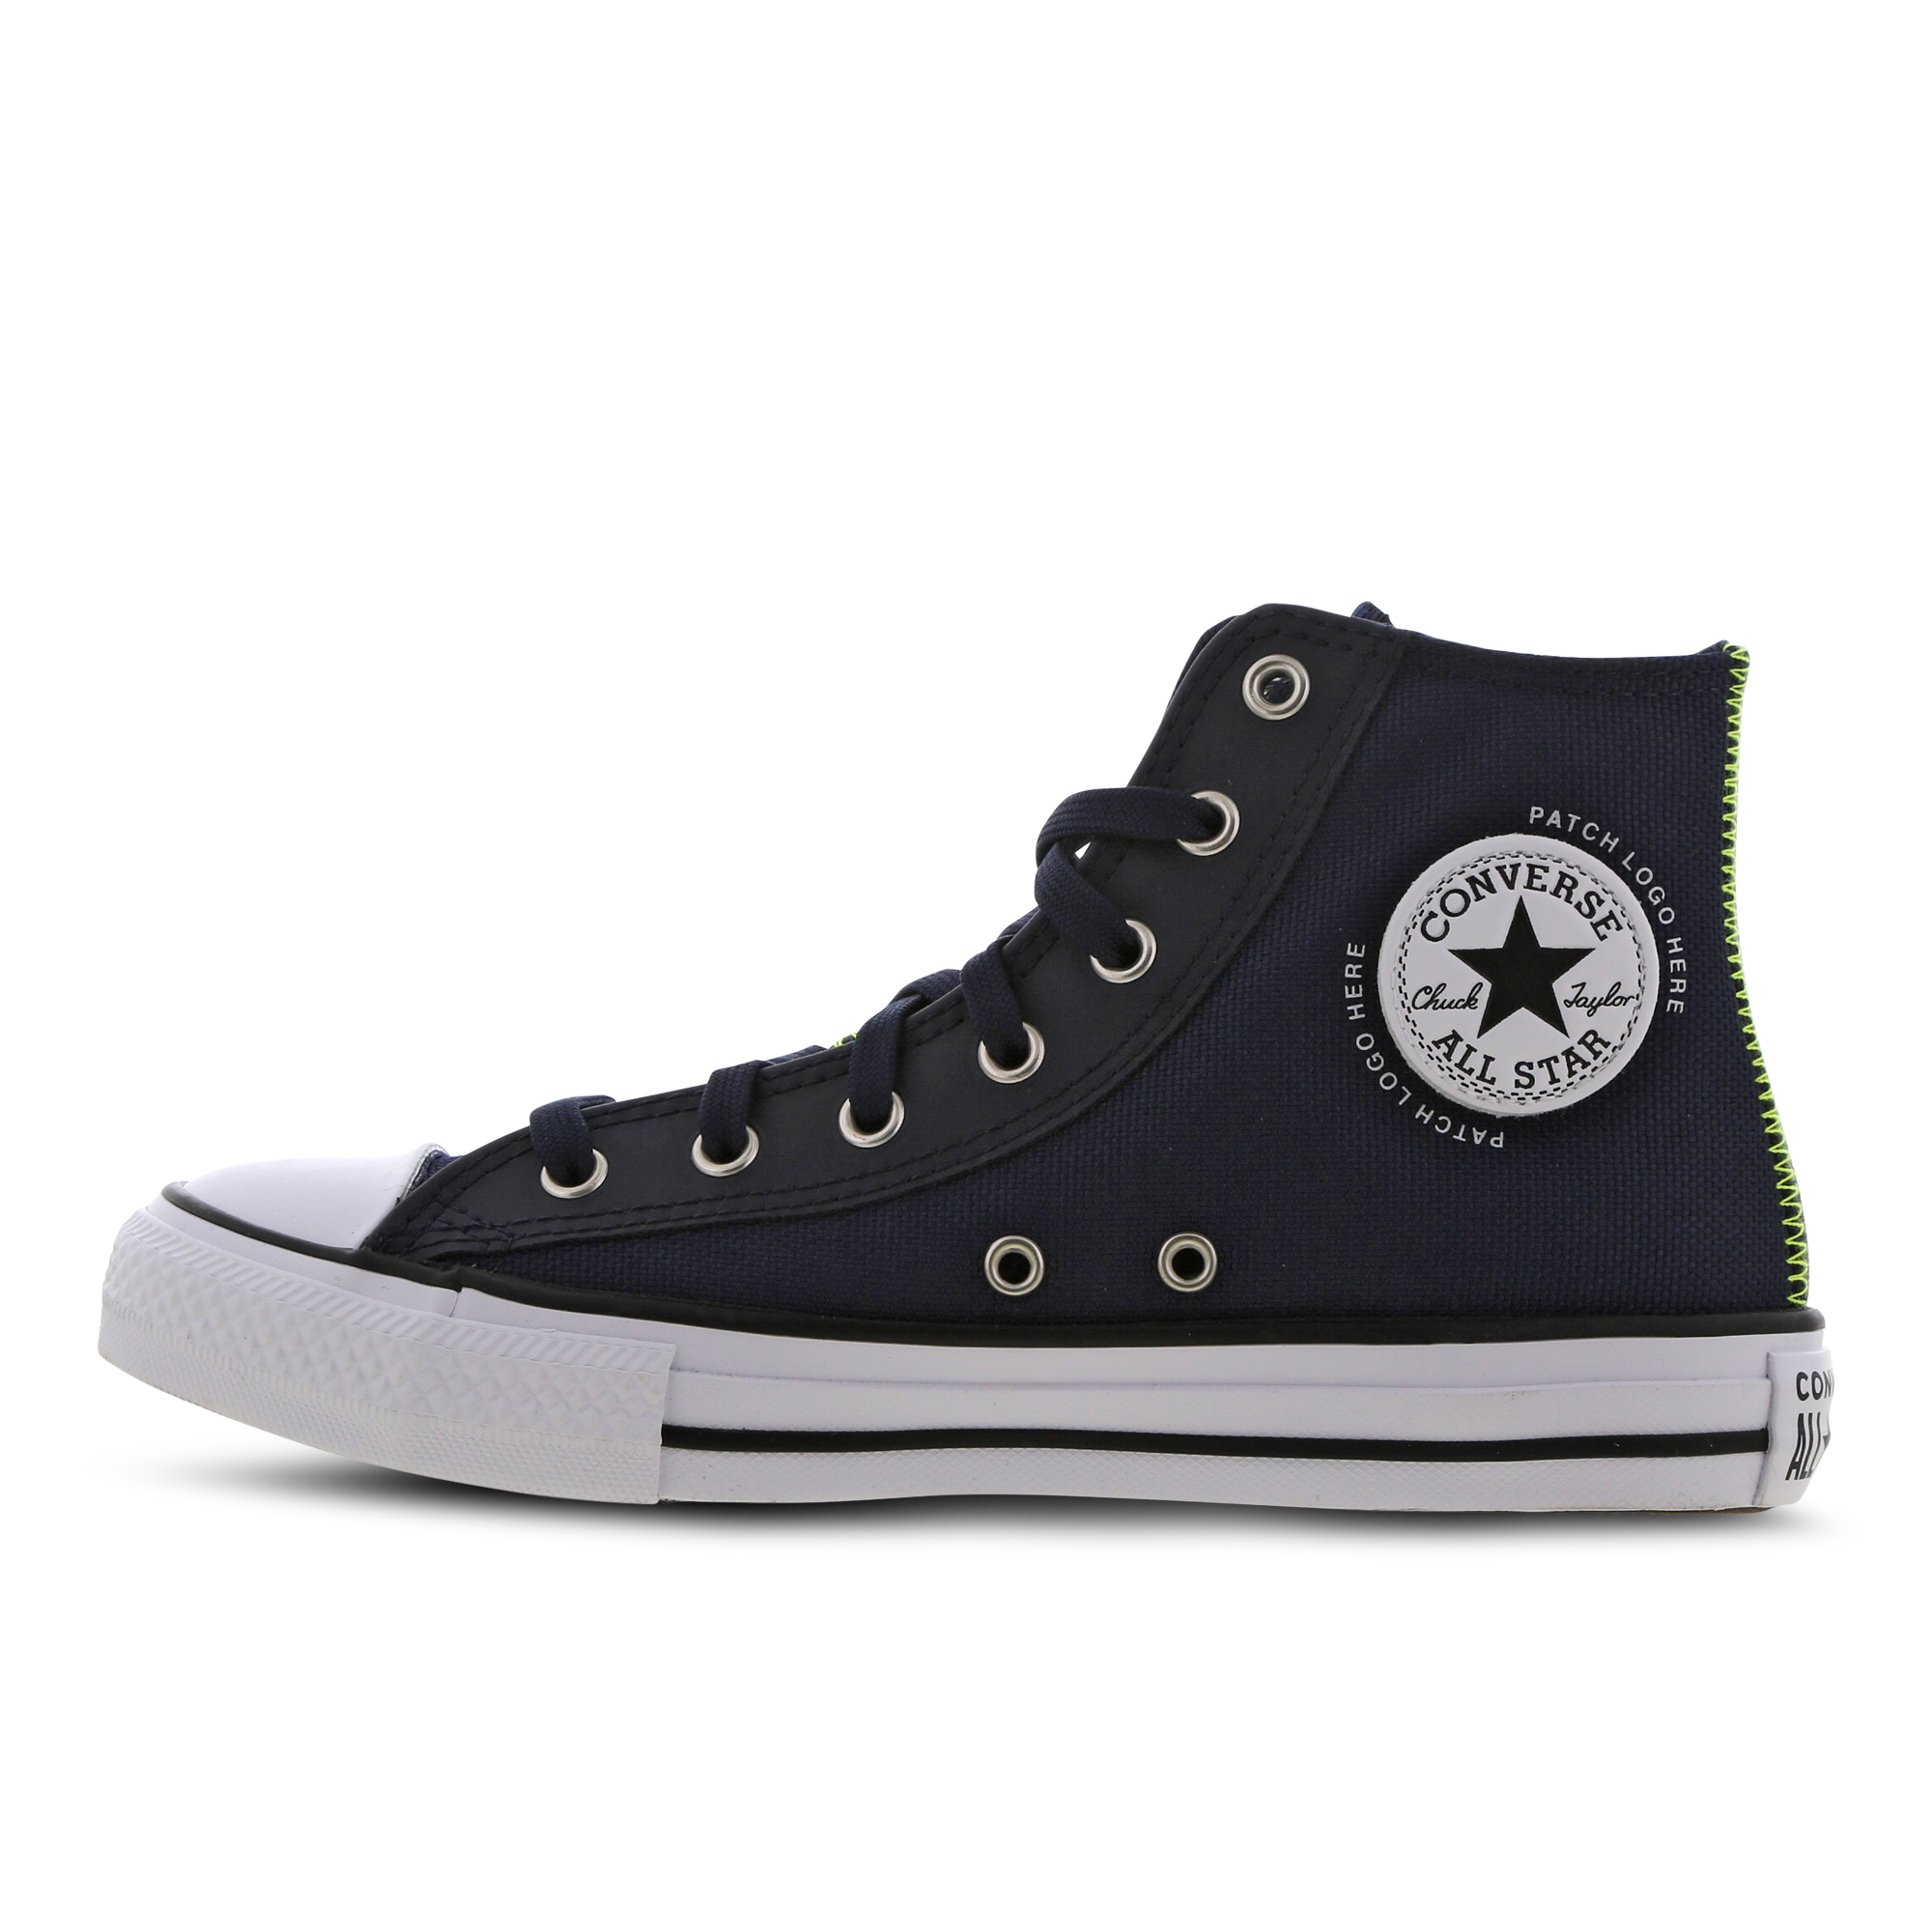 the chuck taylor all star sneaker